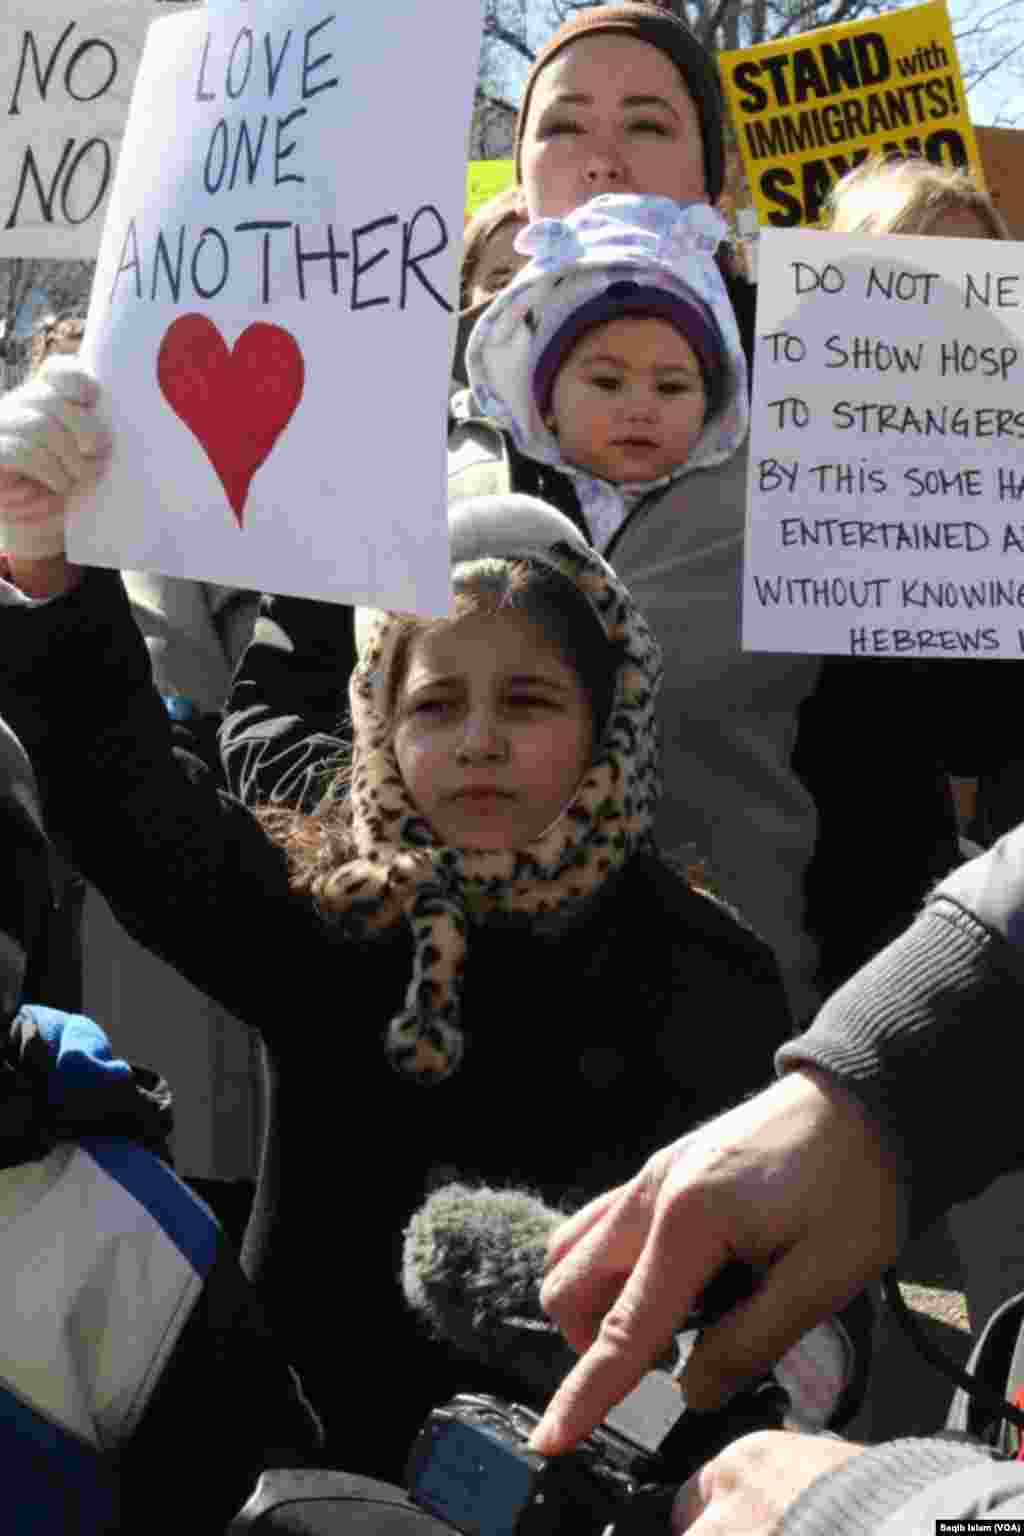 Families with children holding signs participated in support of immigrants and refugees, Feb. 4, 2017, in Washington, D.C. (S. Islam/VOA)